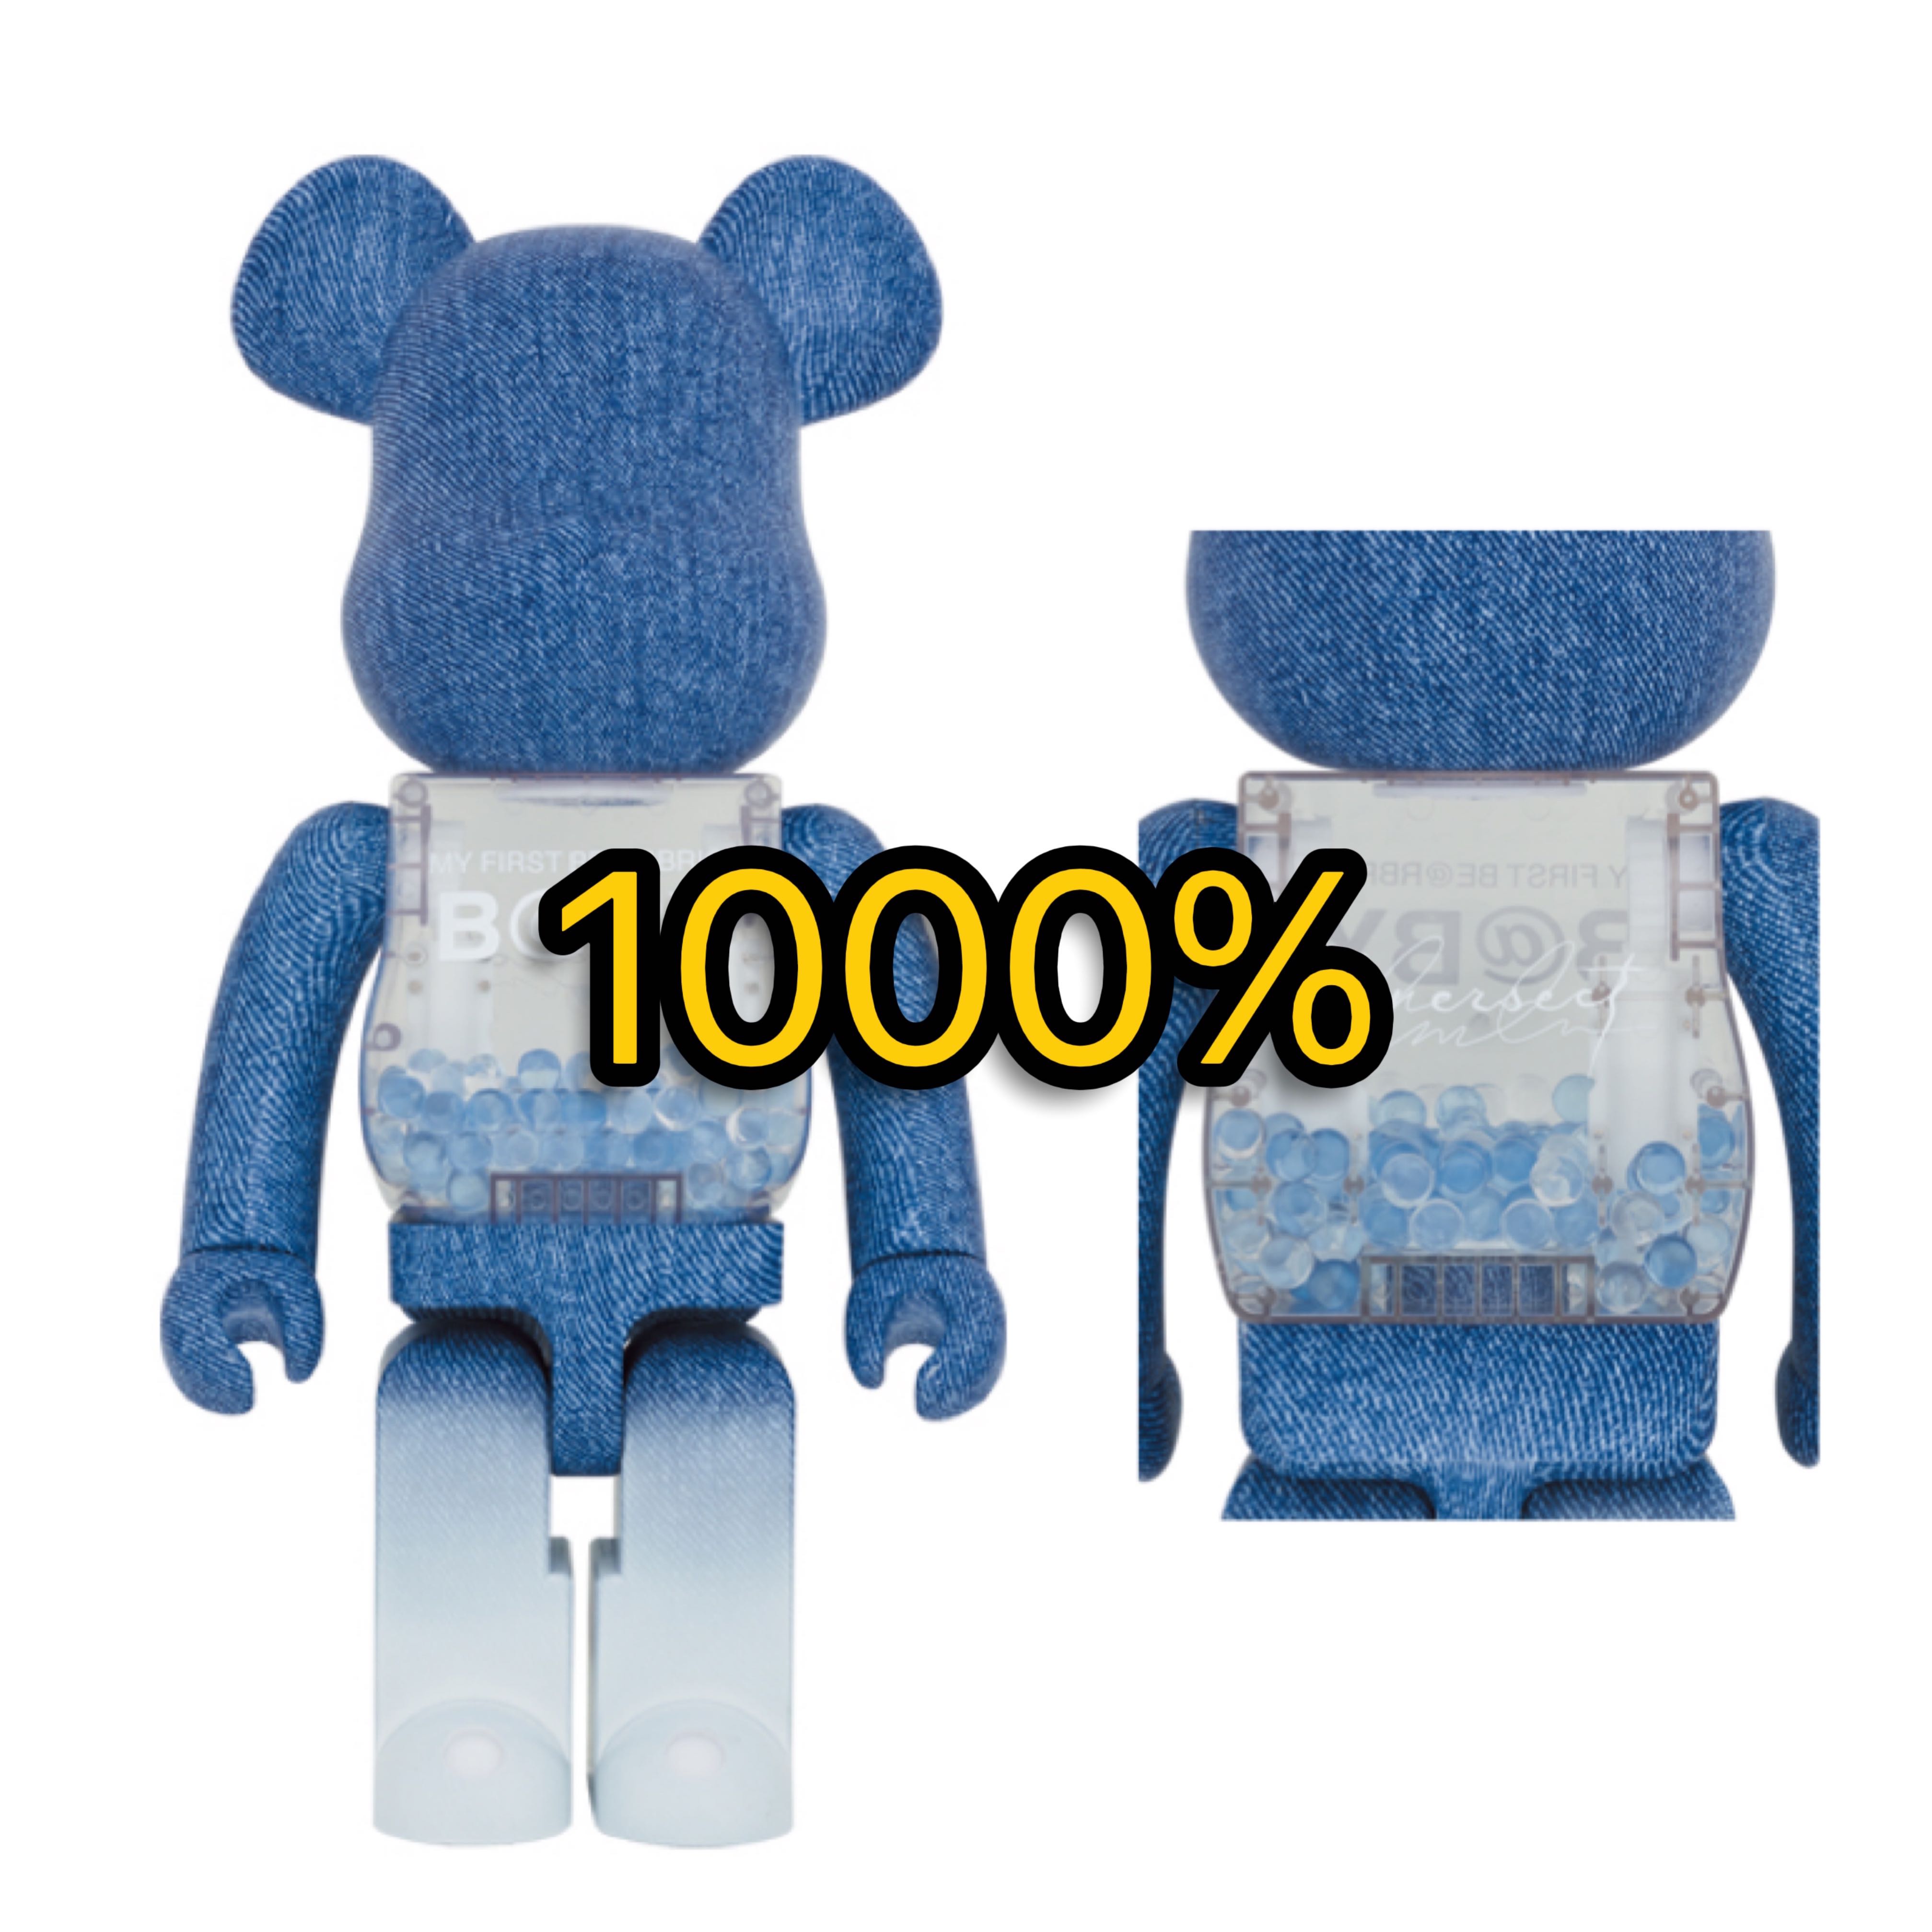 MY FIRST BE@RBRICK B@BY WATER CREST 1000